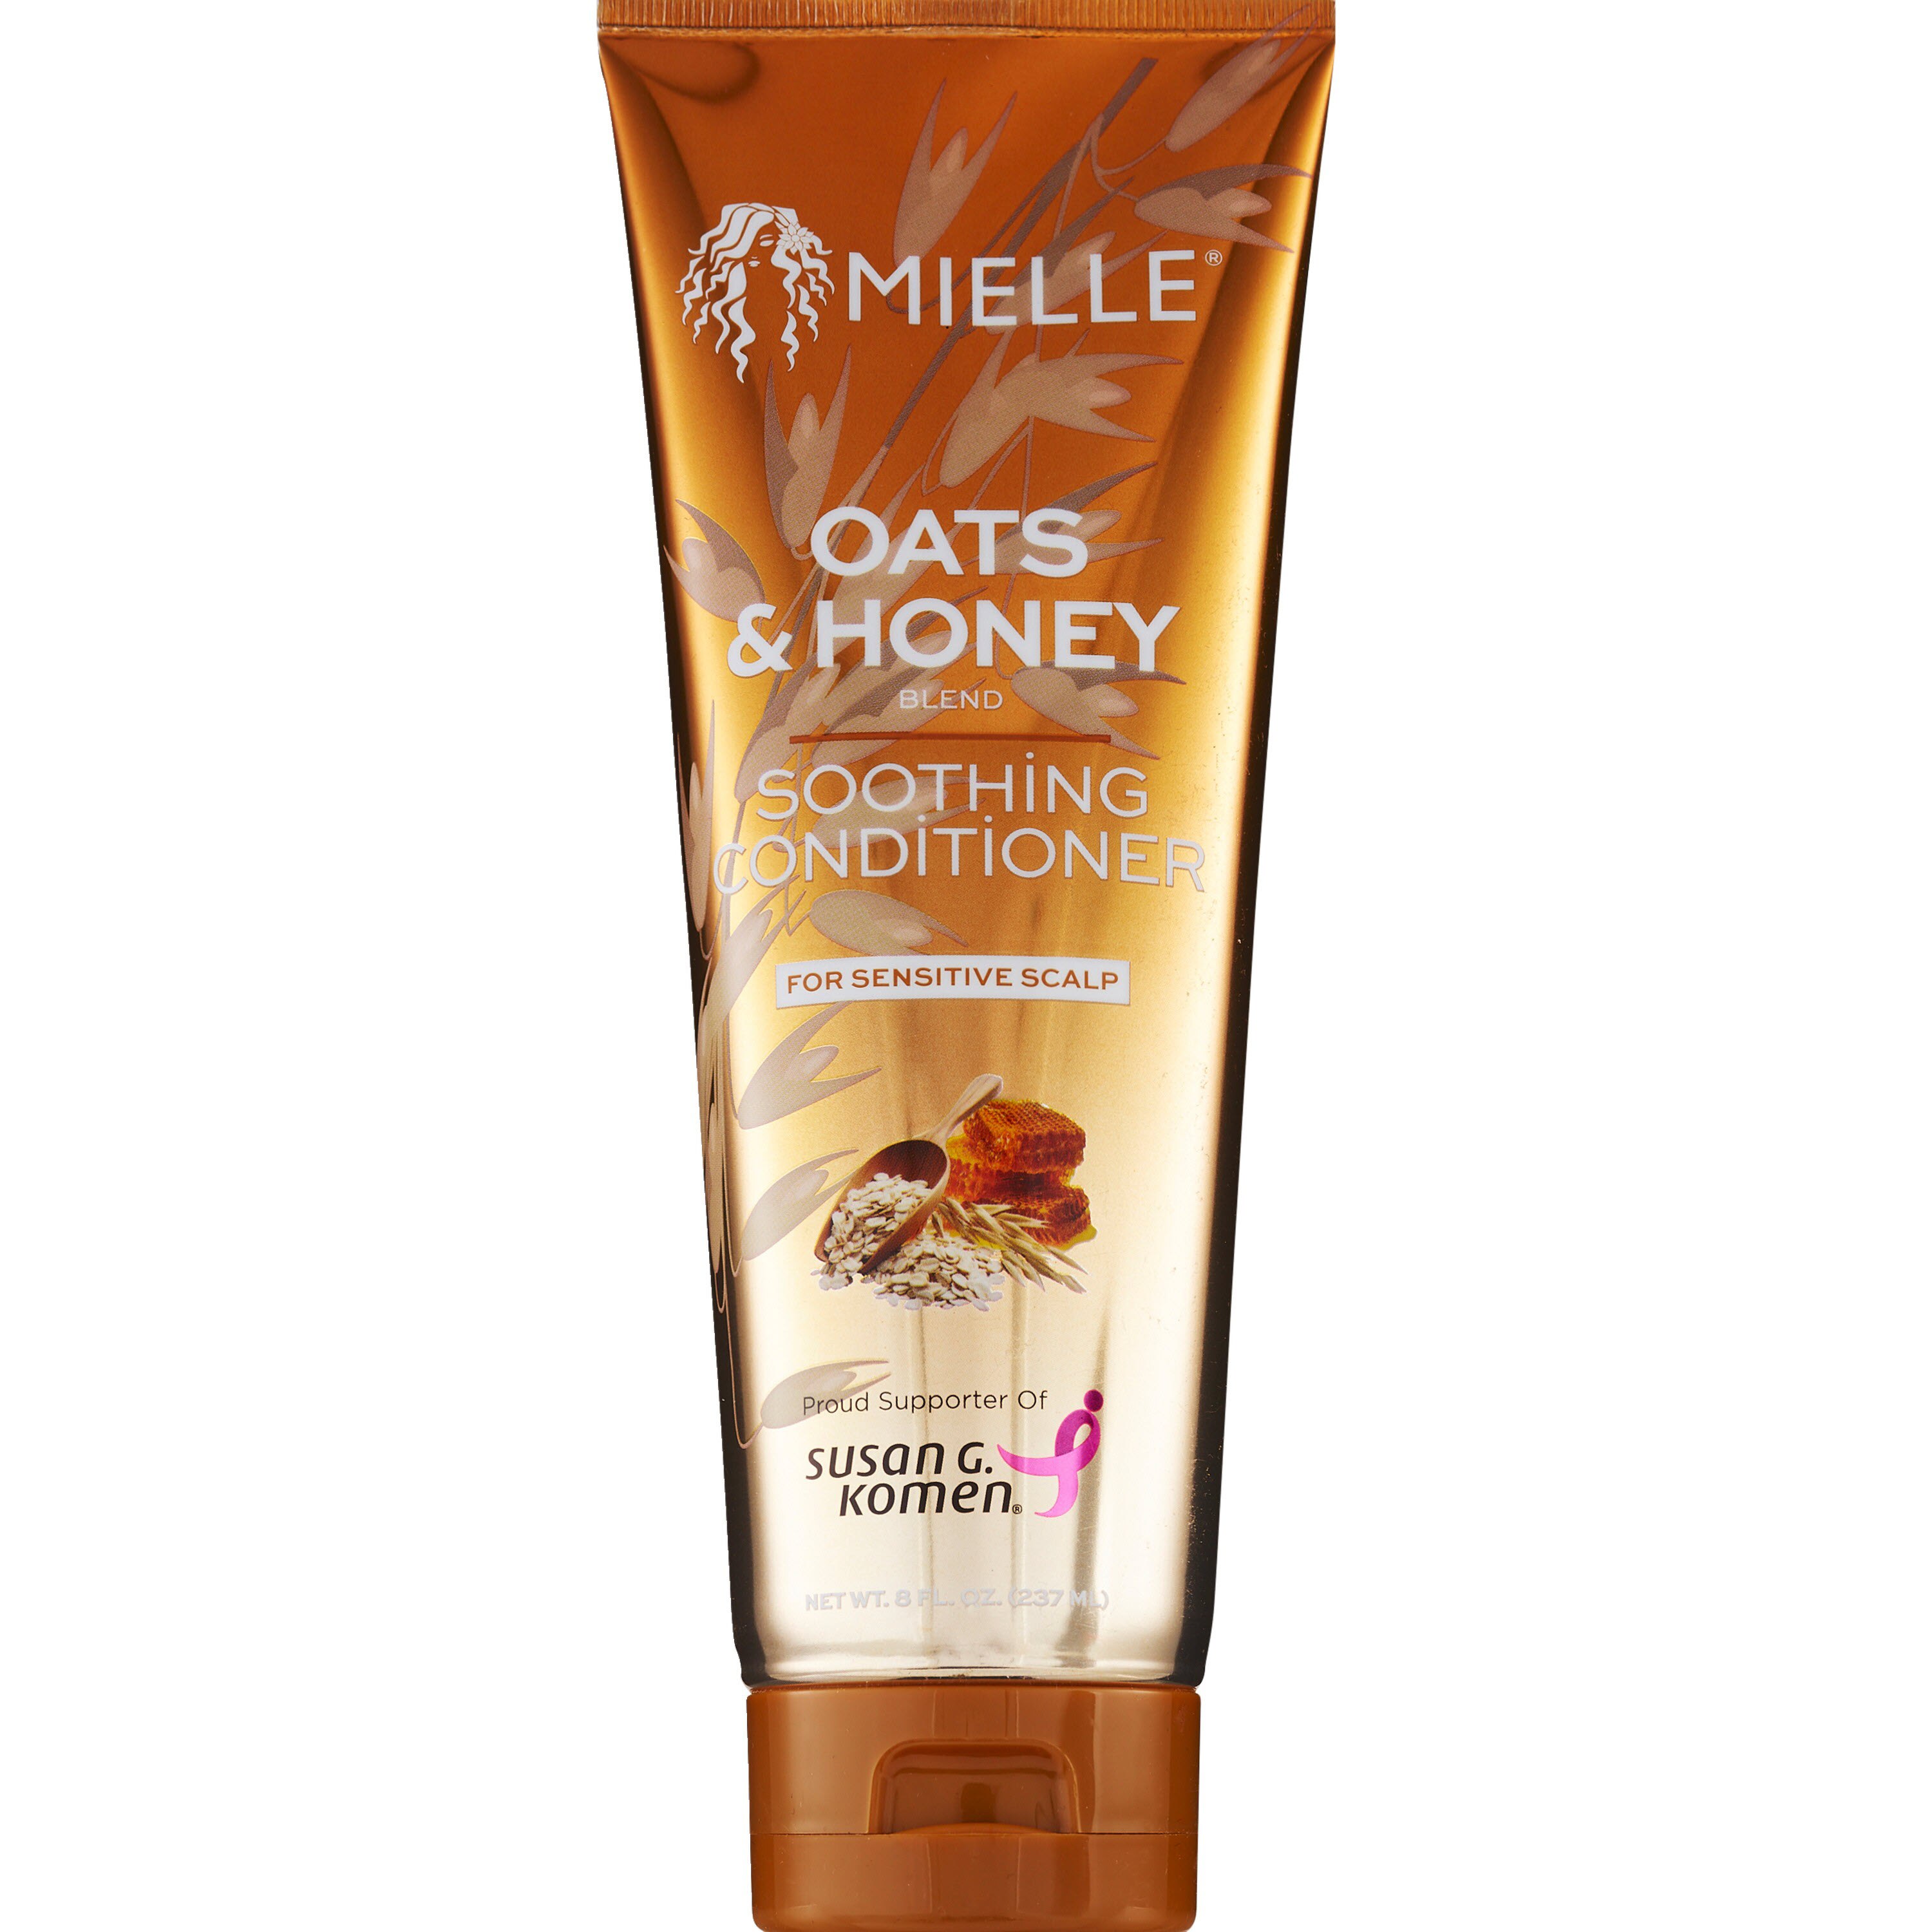 Mielle Oats & Honey Soothing Conditioner, 8 OZ